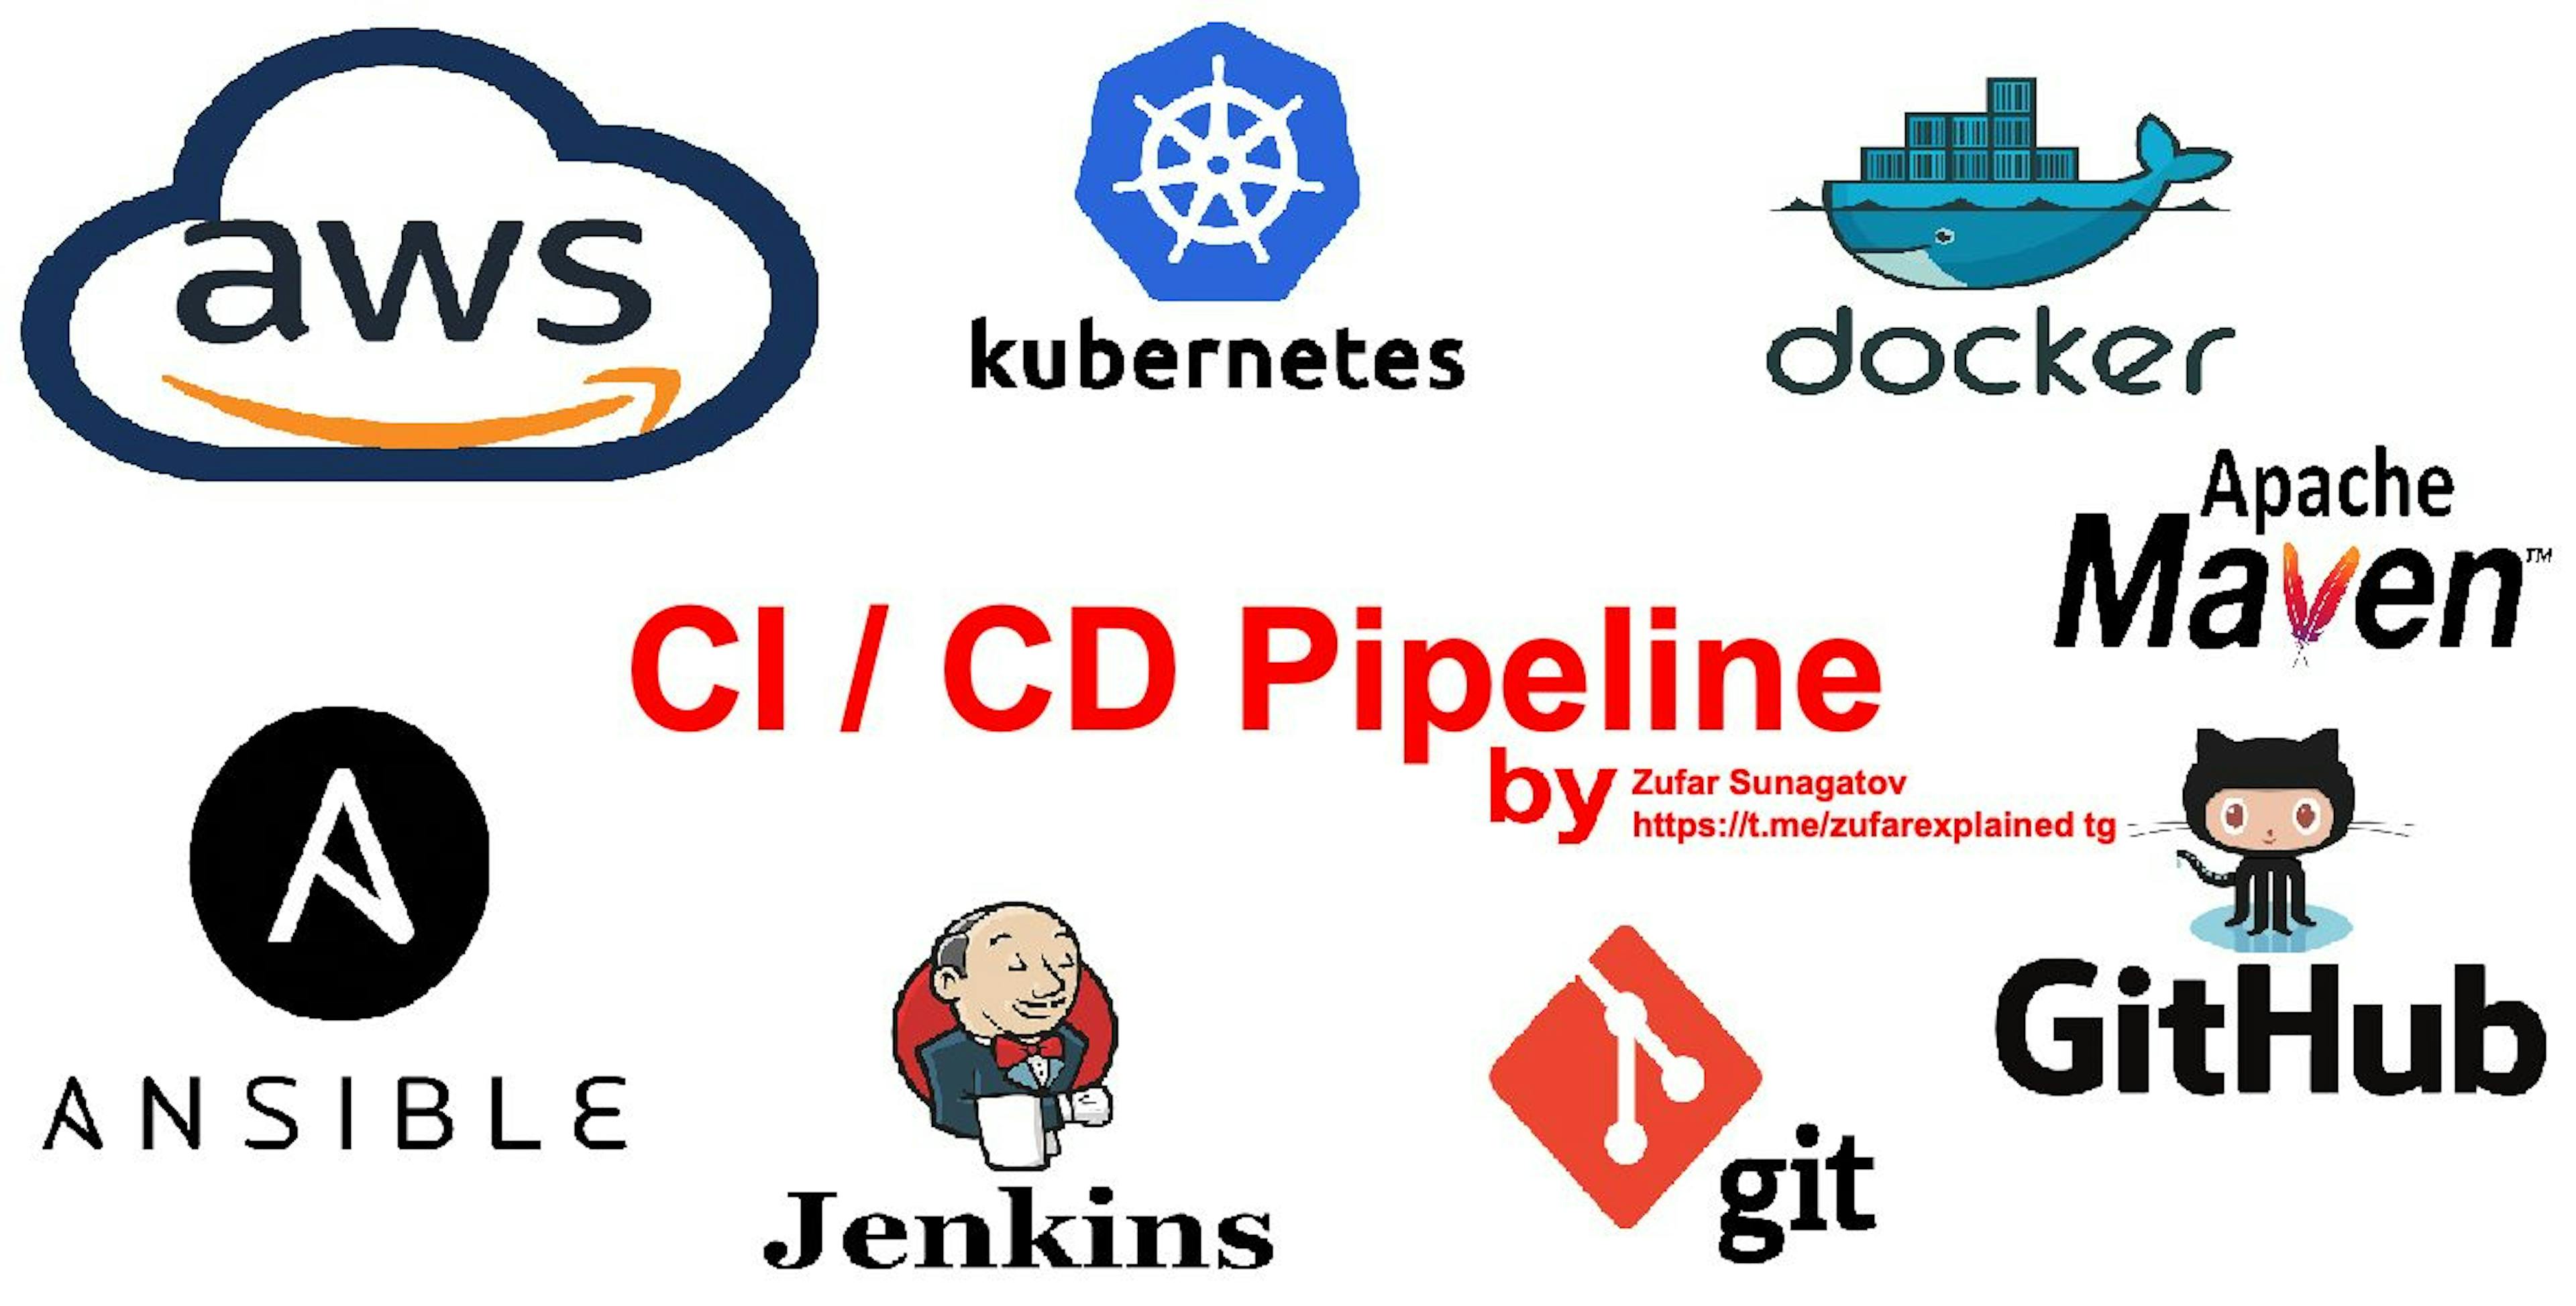 featured image - Building a CI/CD Pipeline with AWS, K8S, Docker, Ansible, Git, Github, Apache Maven, and Jenkins